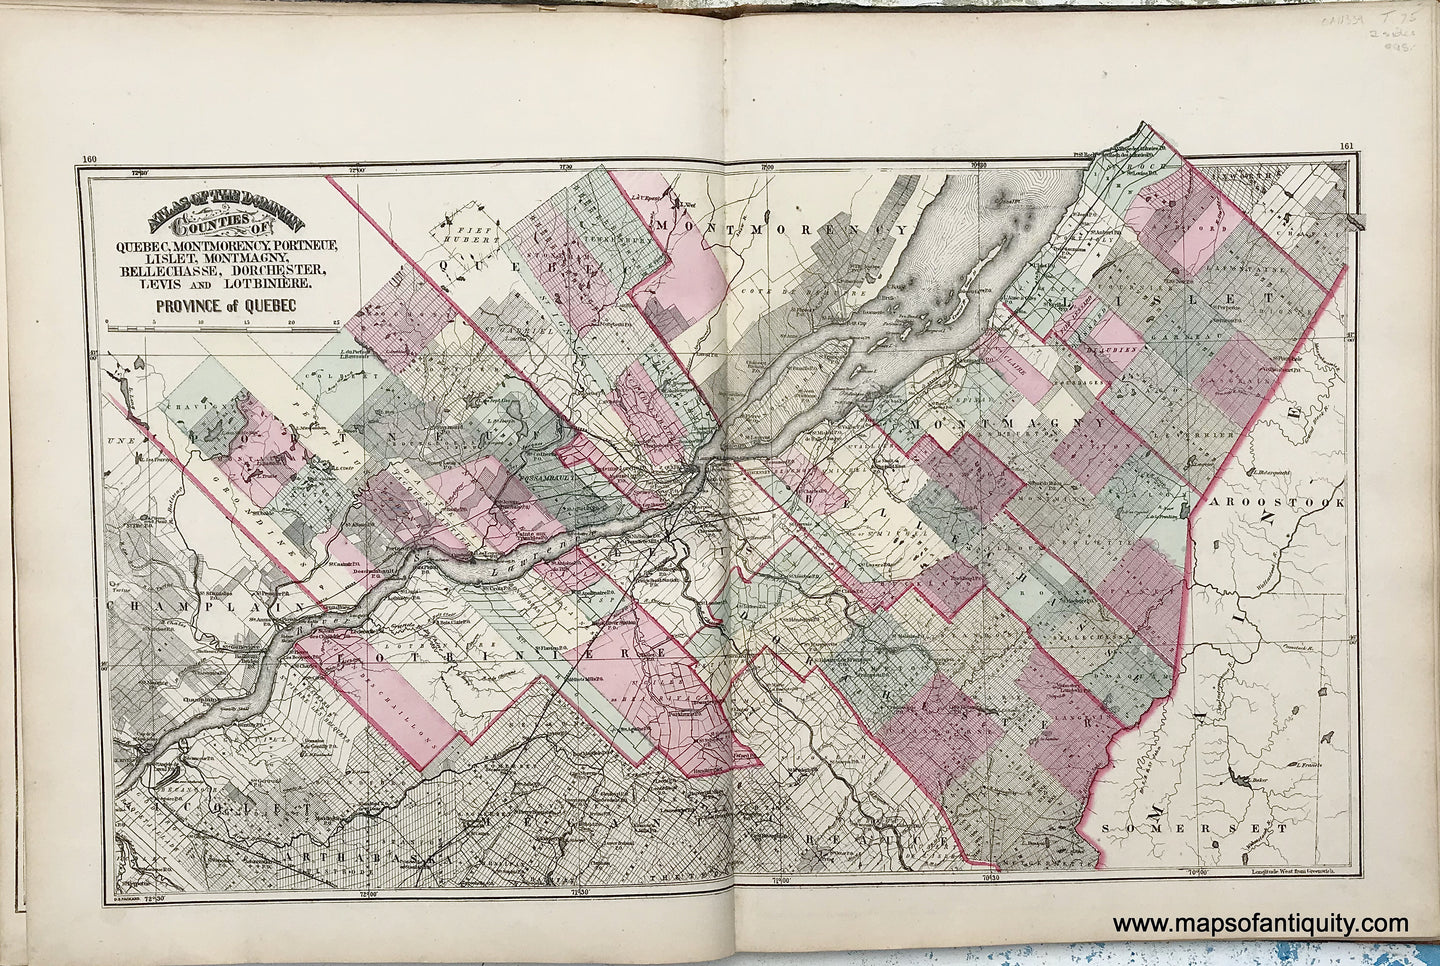 Antique-Map-Sheet-with-three-maps:-Counties-of-Quebec-Montmorency-Portneuf-Lislet-Montmagny-Bellechasse-Dorchester-Levis-and-Lotbiniere-/-Plan-of-London-in-Ontario-/-County-of-Pontiac-in-Quebec-1875-Walling-/-Tackabury-Canada-Civil-War-1800s-19th-century-Maps-of-Antiquity